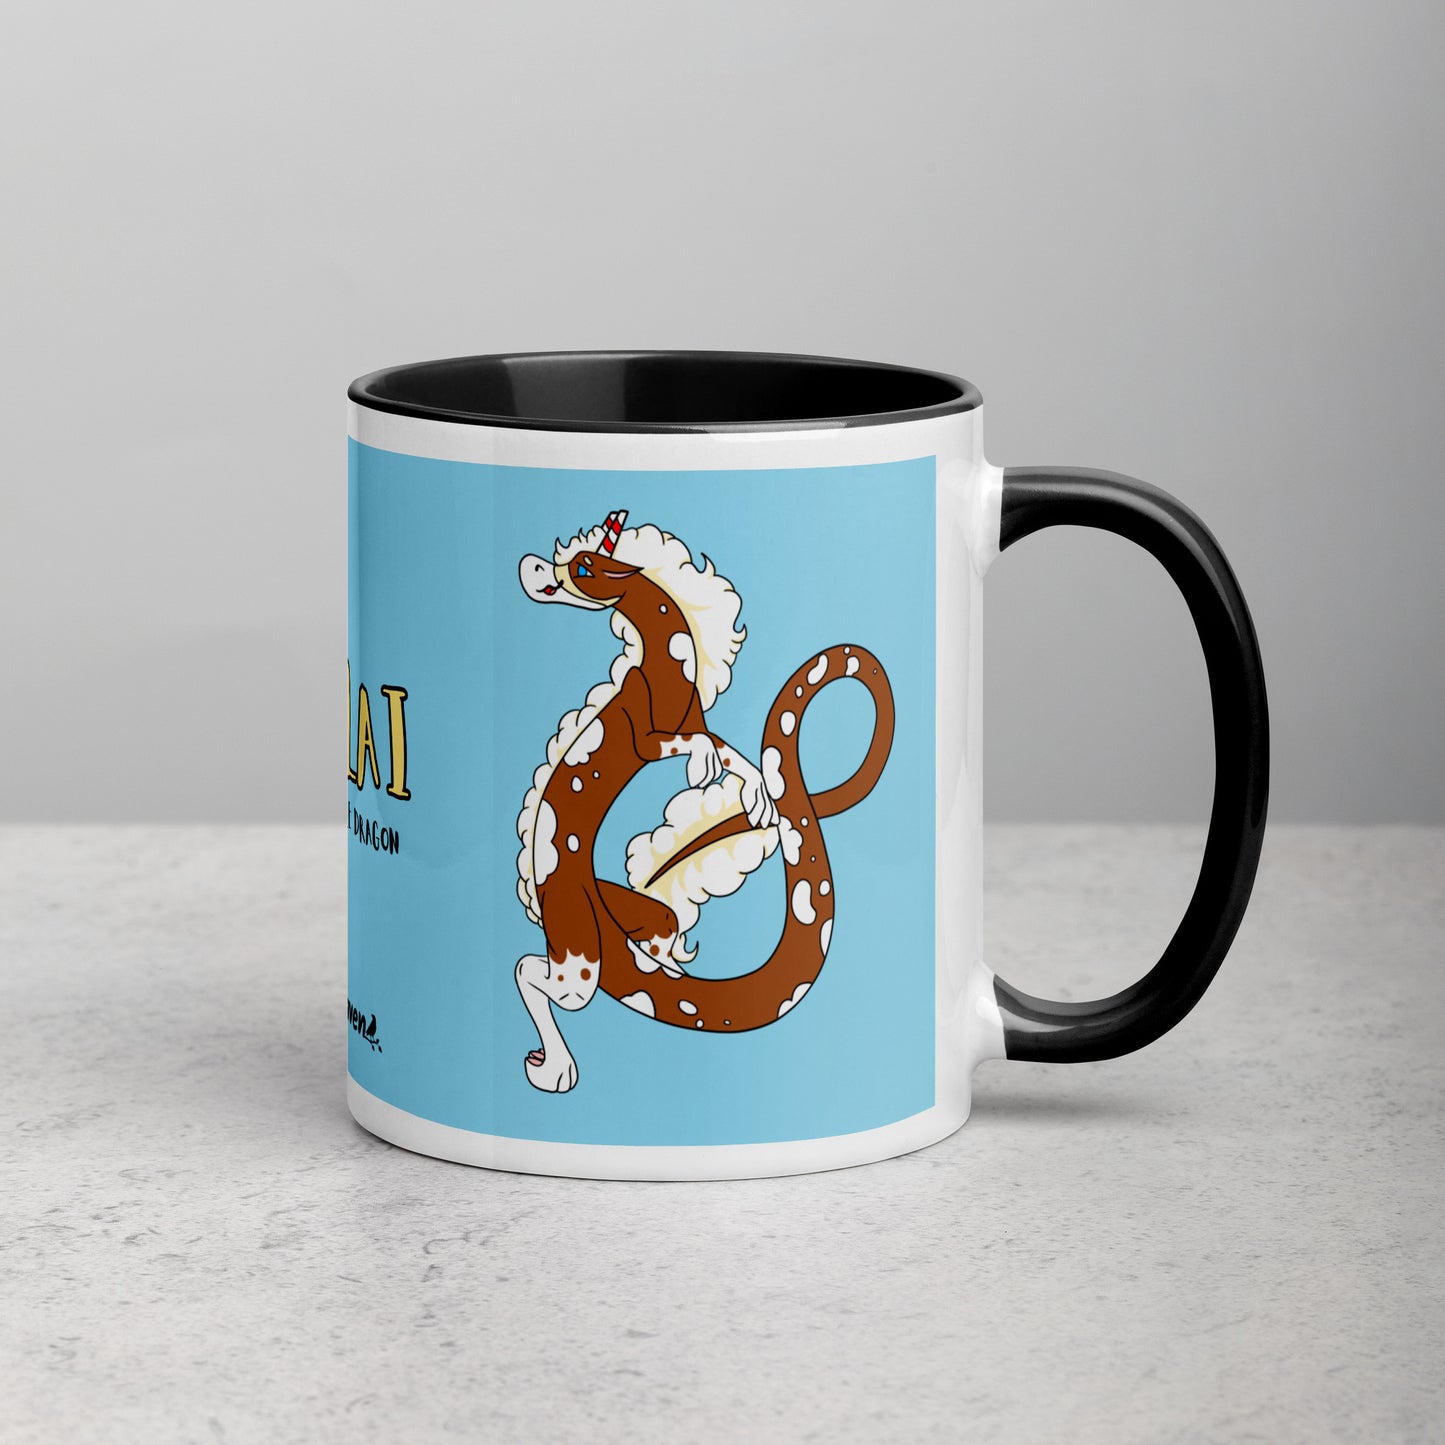 11 ounce ceramic mug with black handle, rim and inside color. Features double-sided image of Nikolai the Fuzzy Noodle Root beer float dragon on a light blue background. Mug is microwave and dishwasher safe. 